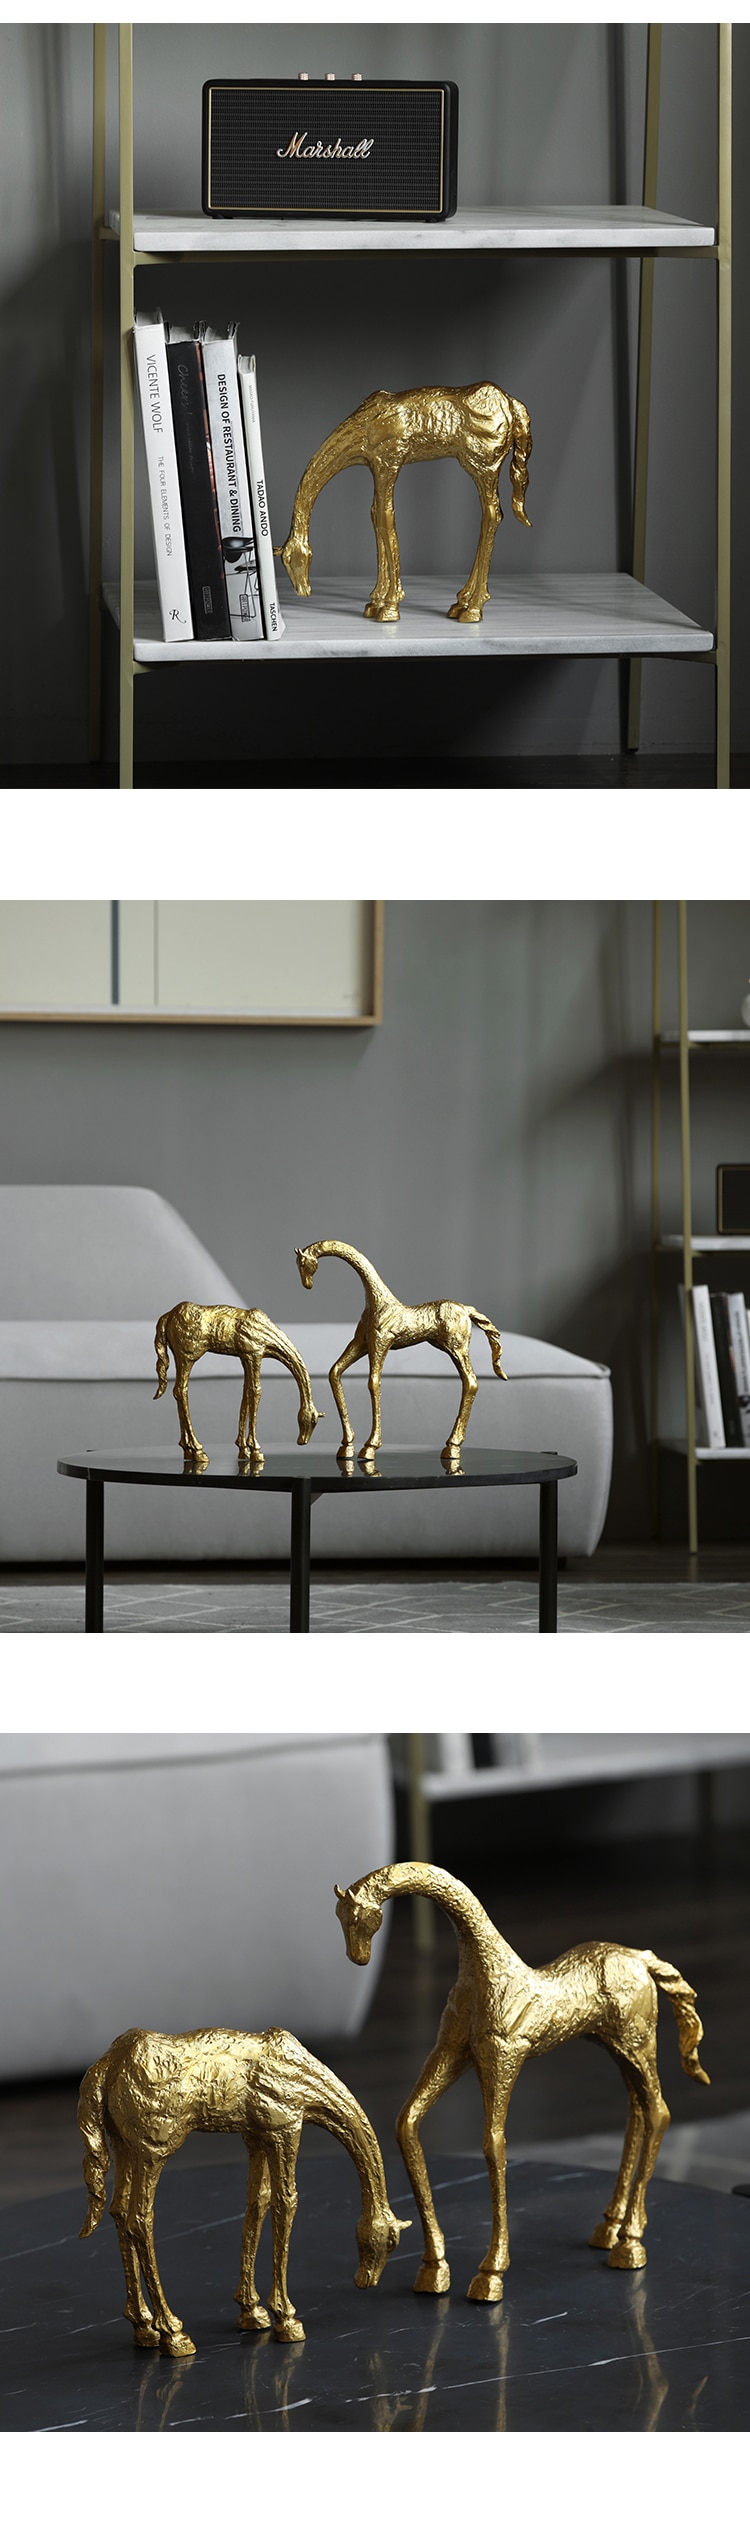 Home Decoration Accessories Art Animal Cast Iron Golden Bowed Horse Statue Decor Figurine Living Room Ornament Gift Furnishings